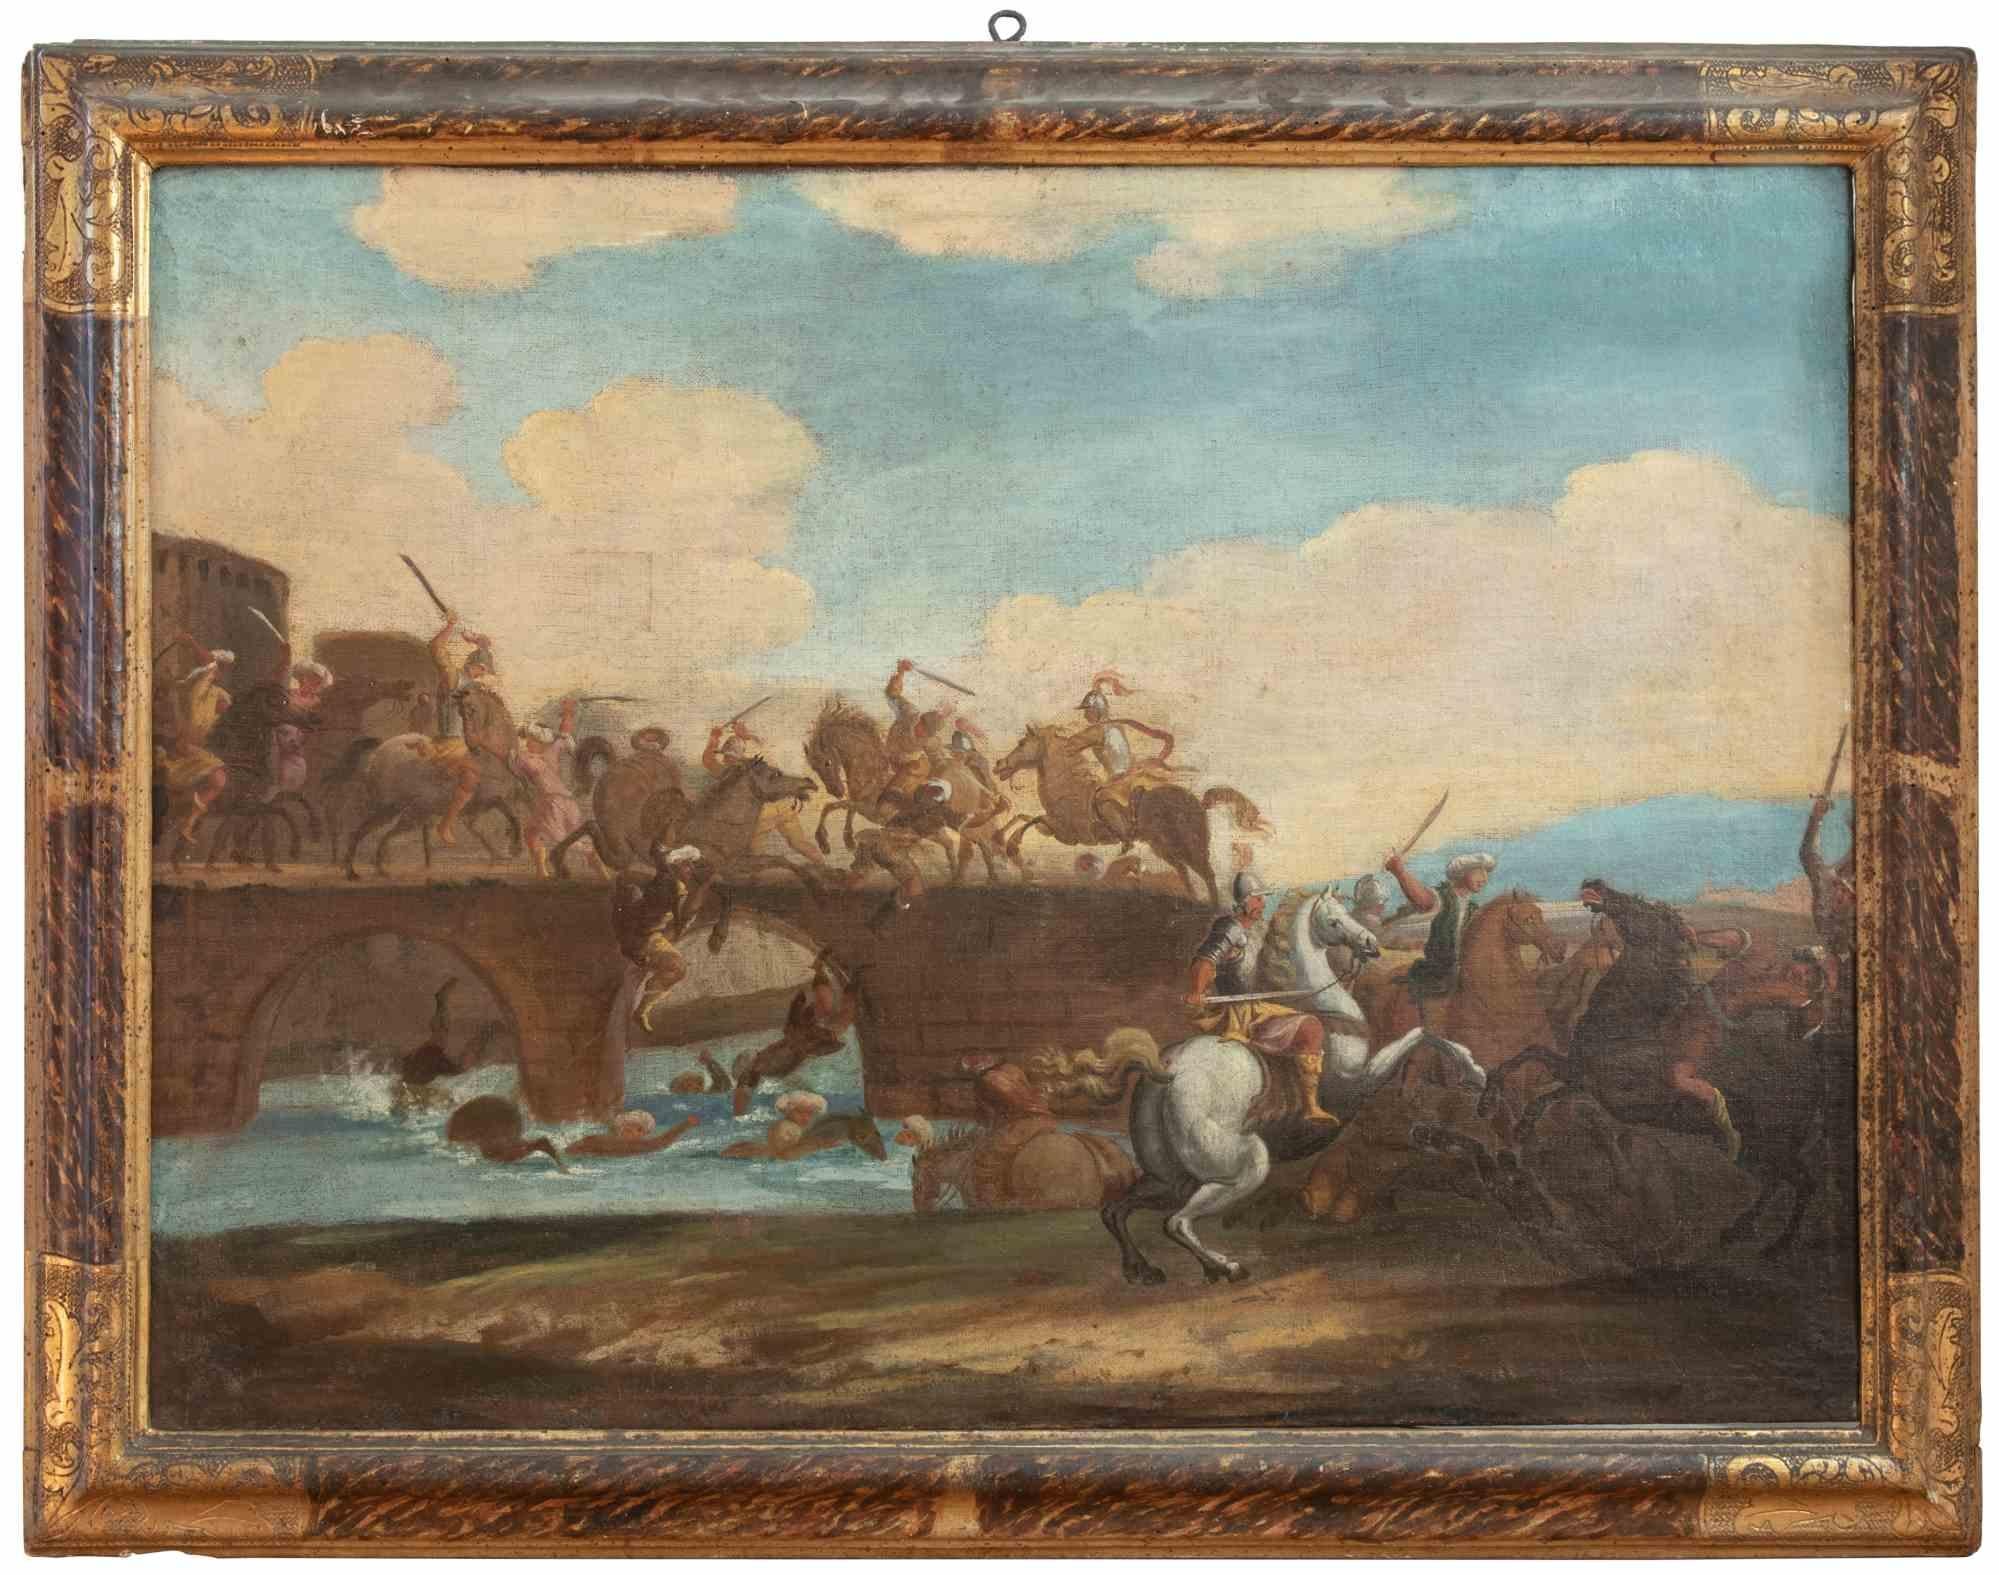 Pair of Battle Scenes is an oil painting realized by an italian artist in 18th century.

110x85 cm each. Framed.

Good conditions.